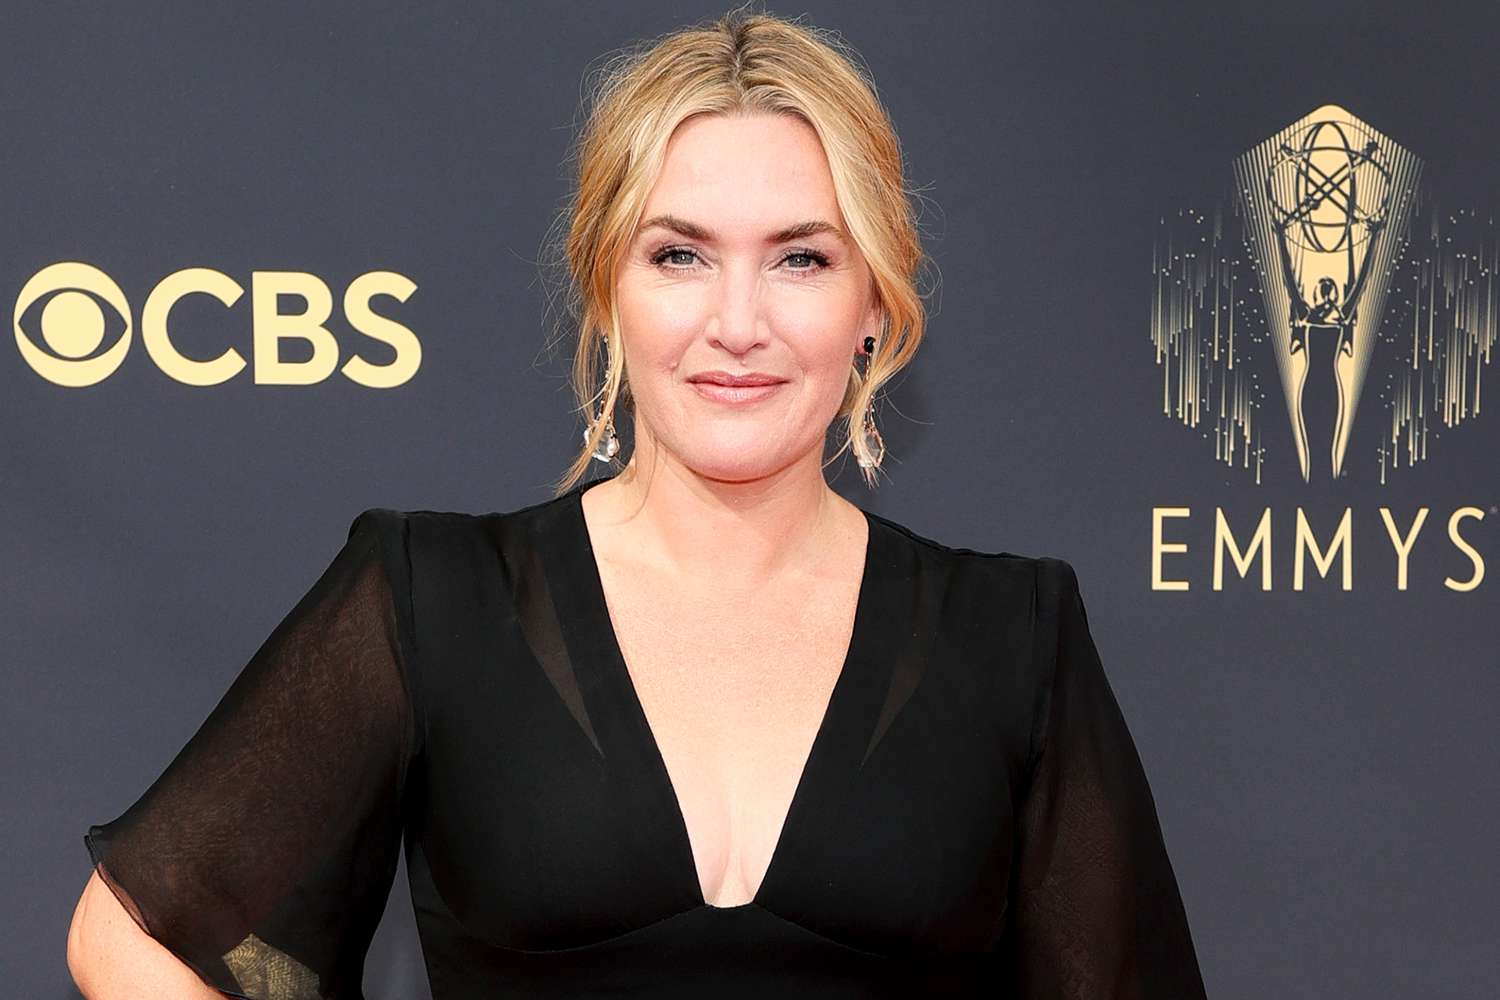 Kate Winslet is returning to HBO for her next limited series